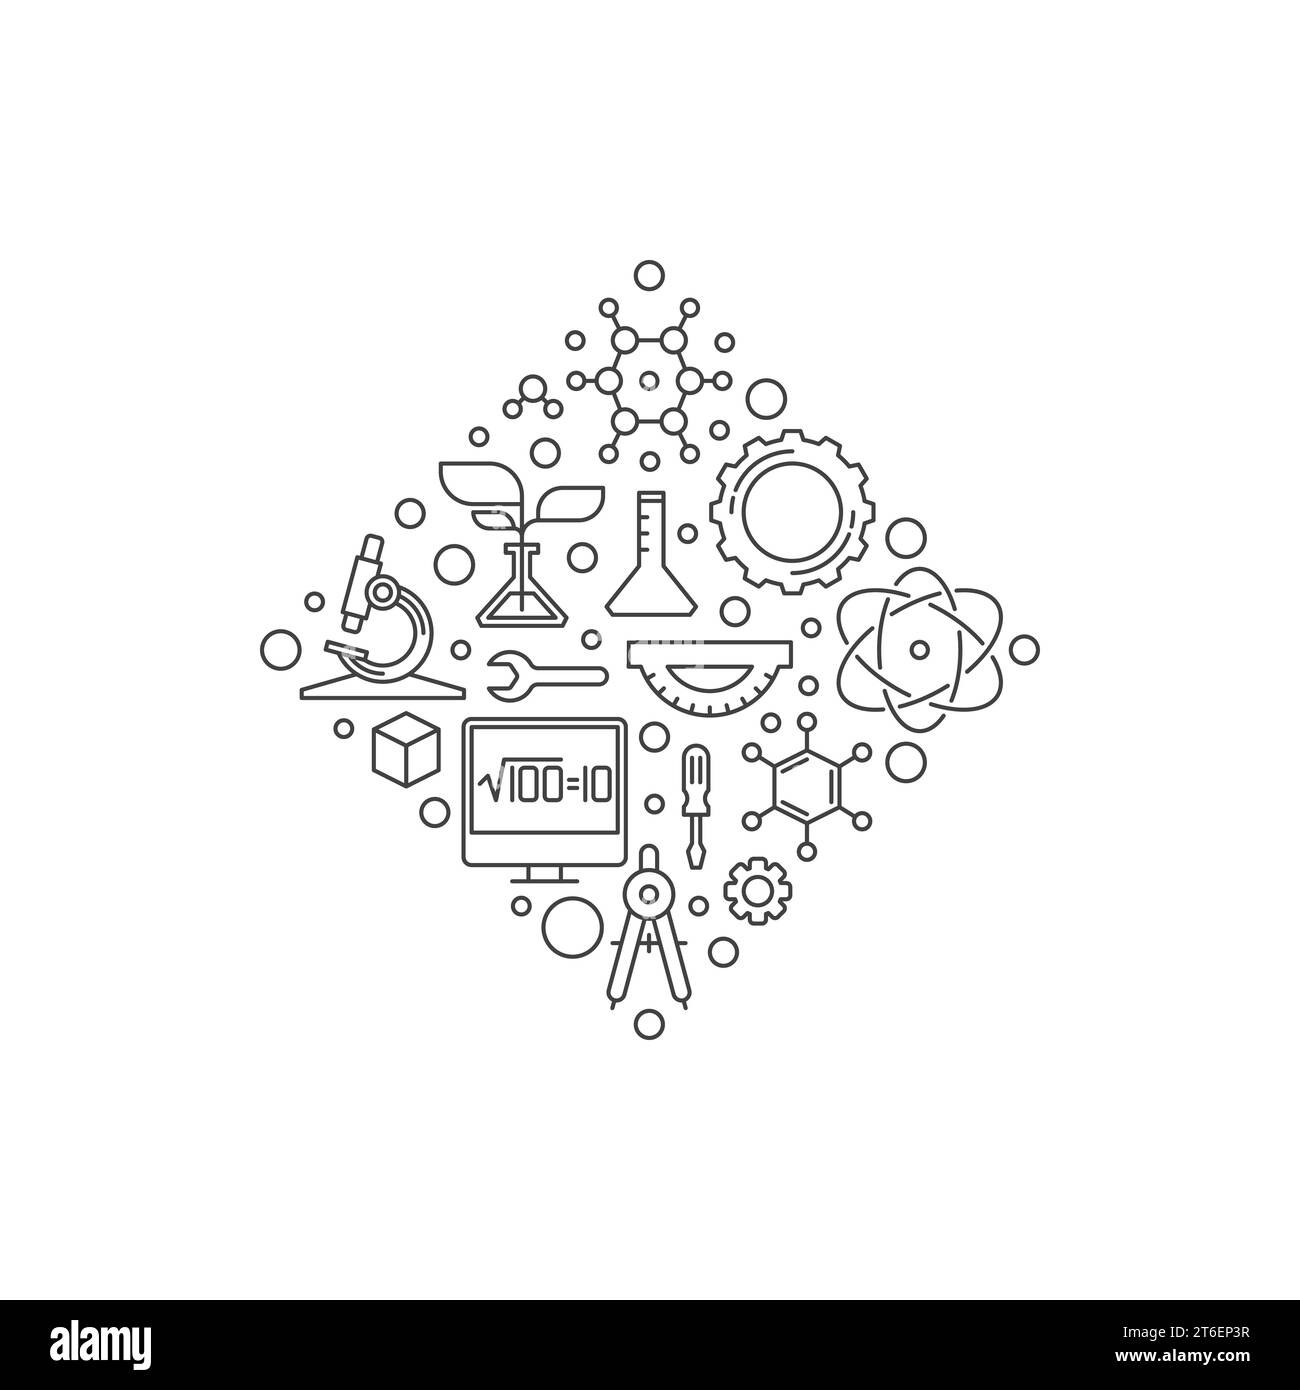 STEM - Science, Technology, Engineering and Mathematics diamond-shaped creative banner - vector simple linear illustration Stock Vector